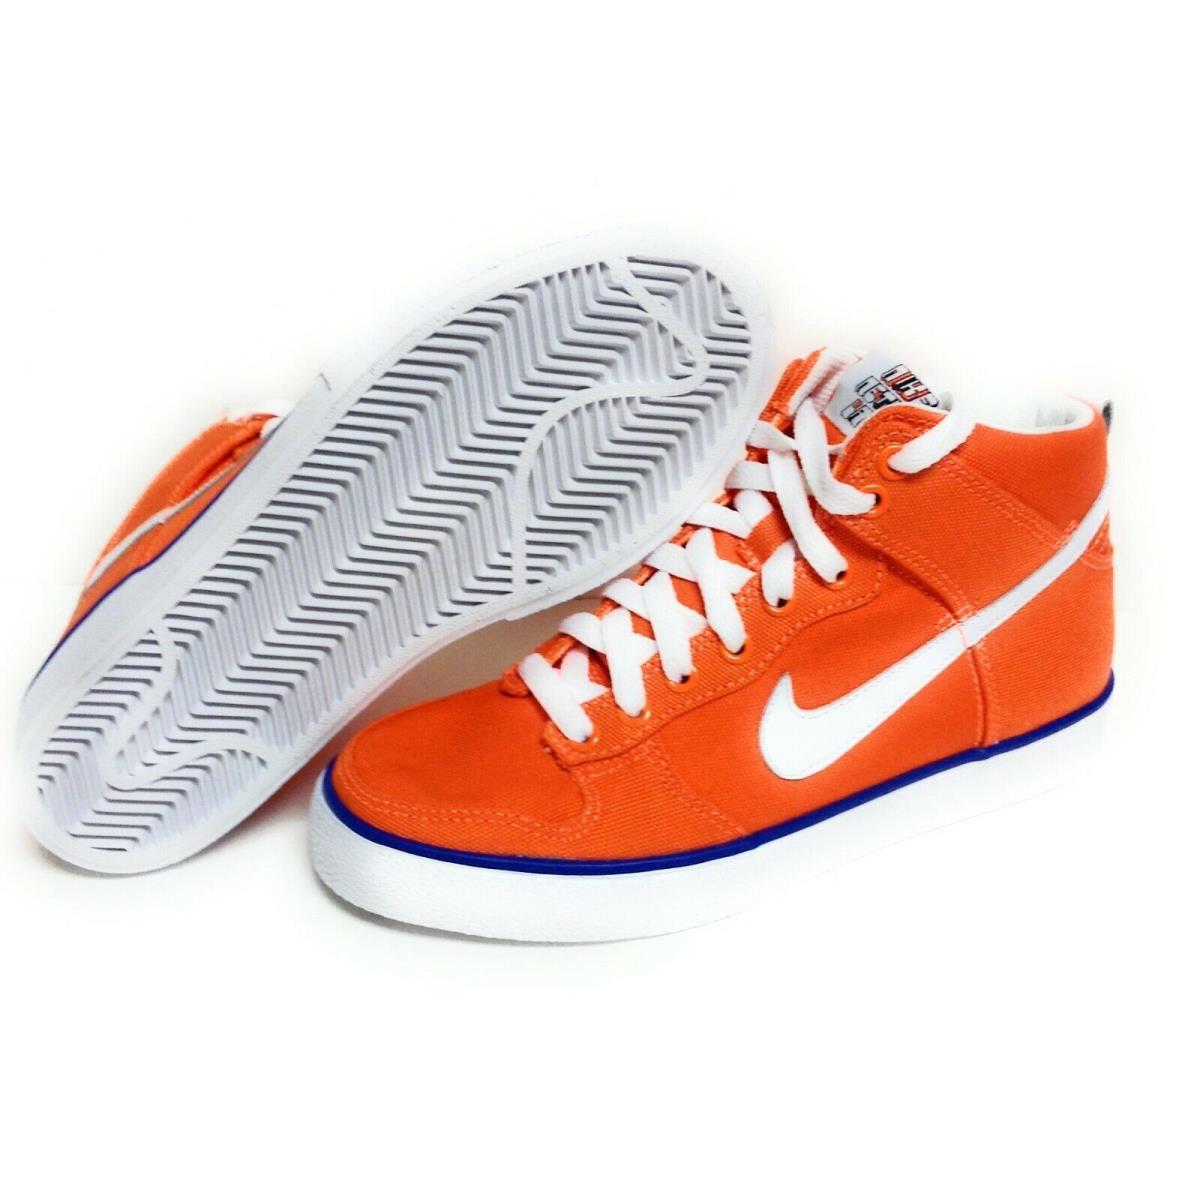 Mens Nike Dunk High AC 398263 800 The Netherlands 2010 World Cup Sneakers Shoes